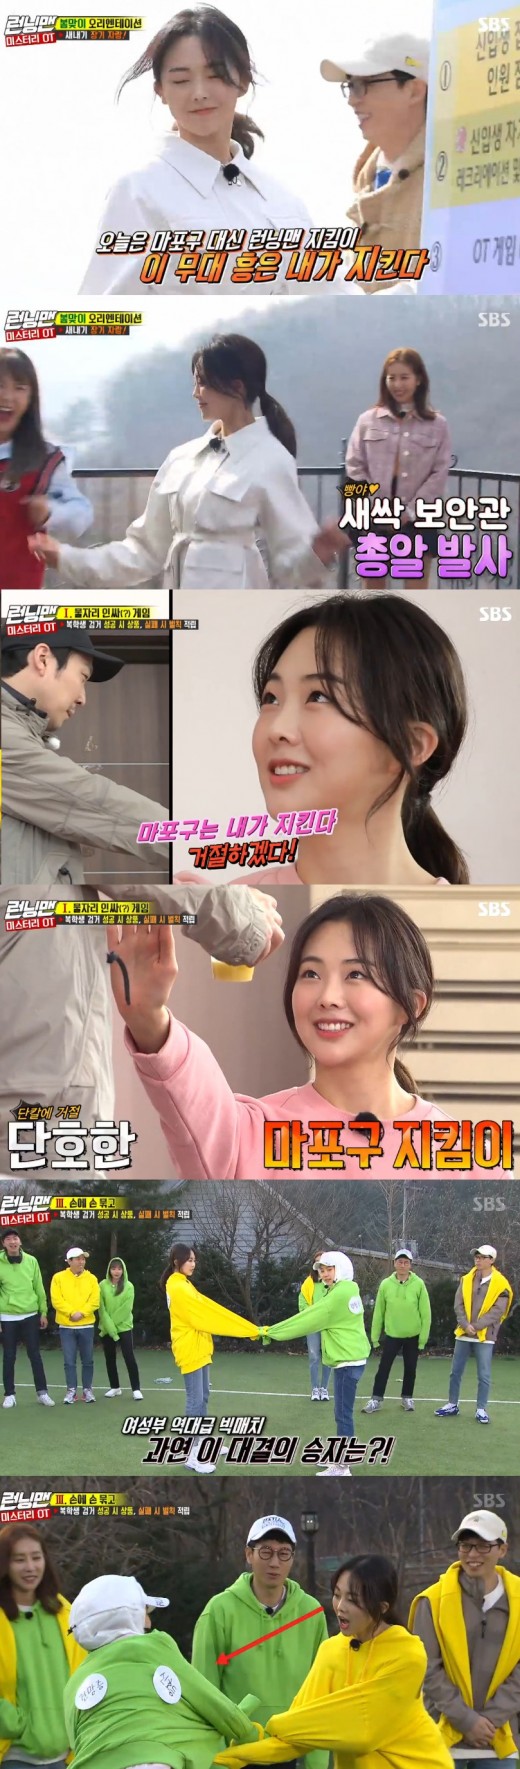 The new girl, Kim Sae-rok, performed a proper performance report ceremony through Running Man.On SBS Running Man, which was broadcast on the 10th, Kim Sae-rok appeared as a guest and showed off his sense of entertainment.Im going to play, said Yoo Jae-Suk, who said, You have to have fun.The first mission, Game, was a surprise to me with a heavy bass that had been hidden. In the Orange Fart Game, I even opened my gag.Lee Kwang-soo laughed at the gesture.In the K-pop Game, the performance of the gimsae-rok was also brilliant; Haha, who was in danger of penalties, was the beginning of the request for black roses from the gimsae-rok; these were the residents of the Mapo District.I will keep the Mapo district, I will refuse, he said firmly, laughing.Furthermore, Kim Sae-rok showed off his disassembly and athleticism as the team leader of the new team in the game of the triangular Zimball footwear.The true value of the gimsae-rok was revealed in the game with hands tied. The new modifier of the gimsae-rok is a powerful girl.The days fast-paced roster showed strong power against Jeon So-min, who used a way to lie down, but the fast-paced robe showed a face of the winner by digging into the gap.In the final, he faced Ace Song Ji-hyo. Song Ji-hyo is the owner of the power that represents Running Man.Against Song Ji-hyo, the book was successful and admirable for the first word, and Running Man was surprised that New Rock is not a joke and I am really good.Although the winner of this match was Song Ji-hyo, Kim Sang-rok took a snowball with his performance.